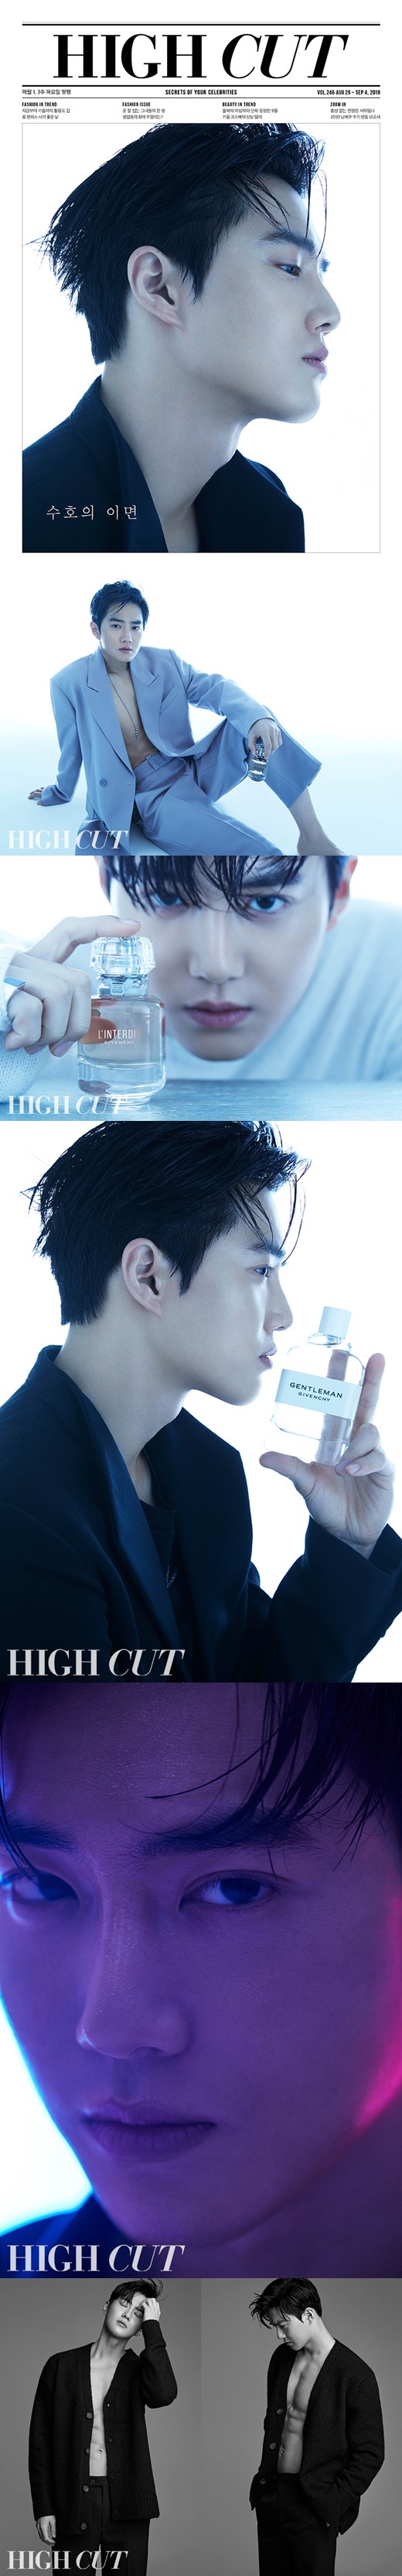 Suho, the group EXO leader, showed affection and trust for the members.Suho has completed the picture with a cold and sensual appearance by decorating the cover of the star style magazine High Cut issued on the 29th.Suho in the picture made him feel the charm of a sensual man from his fingertips touching his eyes, his skin with moisture, and his transparent perfume bottle.He was a gentleman in a tuxedo suit, but he turned wild.The perfect physical was outstanding, with a button-unbuttoned suit, sharp abs revealed between cardigans, and a leather shirt with rough texture.In an interview that followed the shoot, Suho mentioned EXO members who had been together for seven years: Sehun, the youngest child who debuts in his teens, is already twenty-six.All of the members seem to express the maturity coming from age through the stage. I am also proud that the members are doing well in their own way of music and acting that they want to do personally.In addition, he talked about EXO D.O. and Xiumins Enlisted. Suho said, The remaining members feel responsible and fill the gap well.Xiumin saw the concert stage and said, It is so reassuring and reliable. He also revealed about Suho and the human Kim Jun-myeons Image gap gap: Its exemplary, I think thats what my impressions do a lot.In fact, I have a lot of greed for what I like and live fiercely.I have gradually challenged various genres and have a new experience with EXO activities, and I have discovered a new one about me. Suho, who has played different colors from the stained youth to the growth story and romantic comedy such as Glory Day, Girls A, and Richman.Asked what he would like to show as an actor, he said, I do not want to decide that, but I just want to tell you the story of people living. It would be nice to have a story of people around us who can see every day, or a work that depicts everyday and ordinary stories that many people have not known.